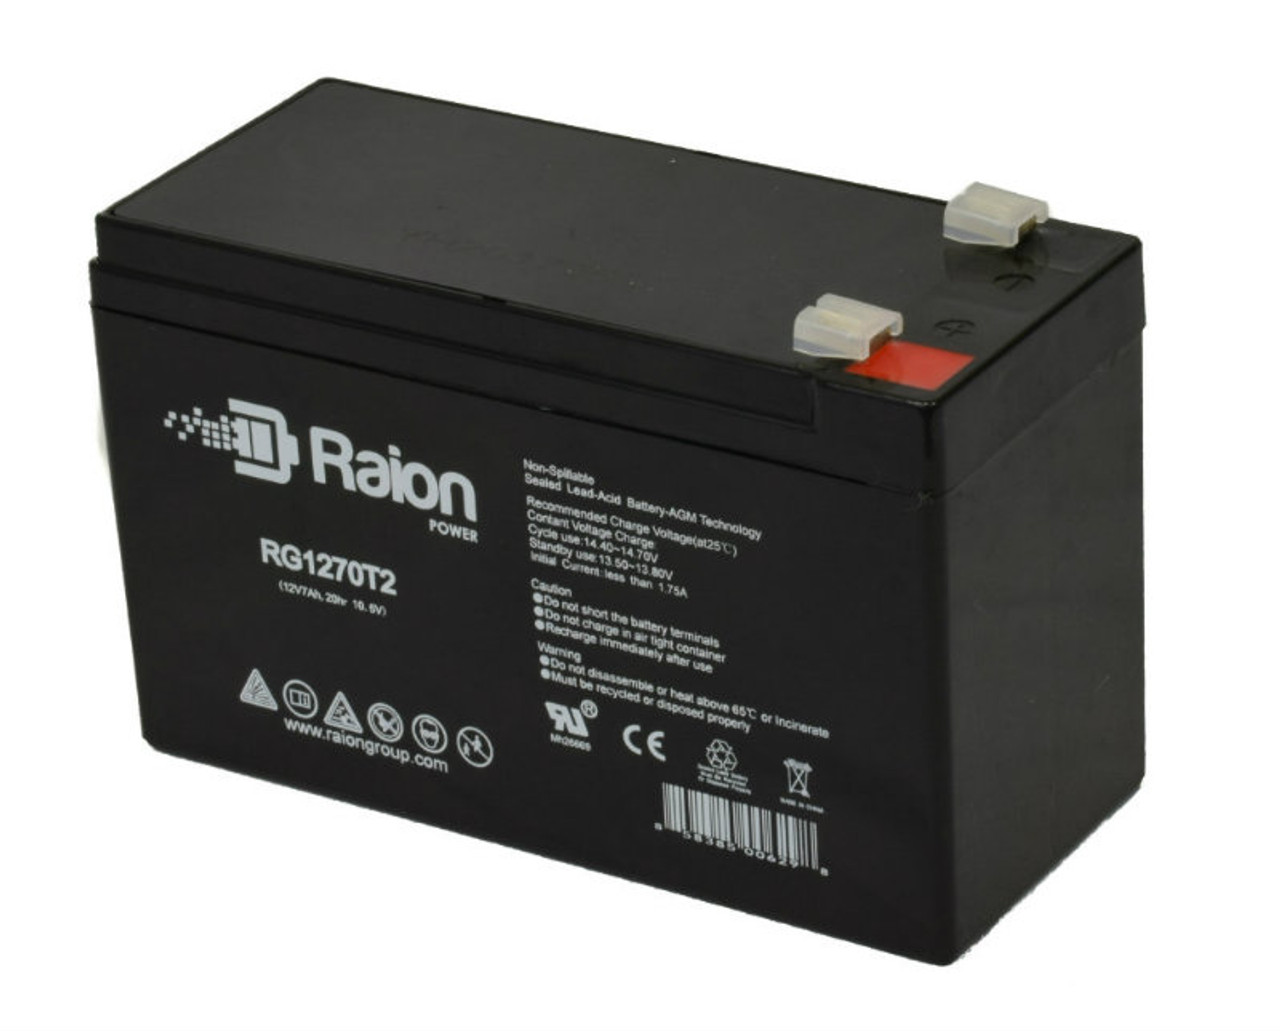 Raion Power Replacement 12V 7Ah RG1270T1 Fire Alarm Battery for Altronix SMP5PMP4